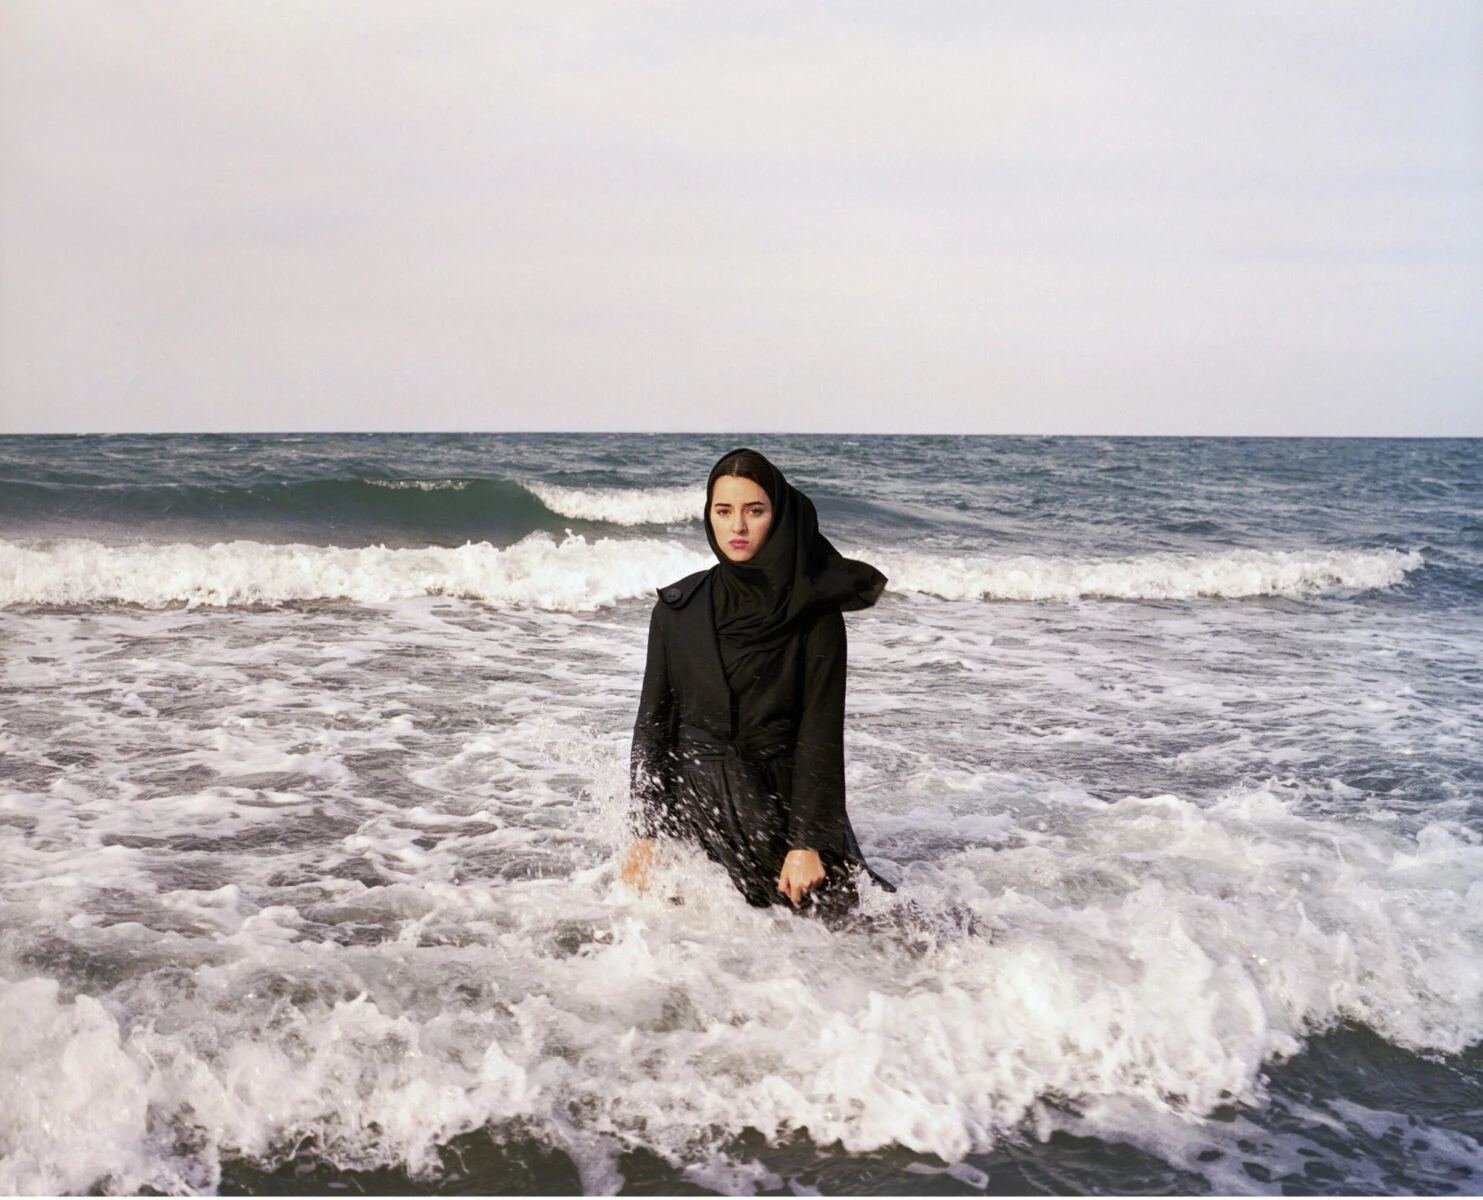 A woman, Sahar, stands clothed in a black coat and black hijab center of frame, looking directly at the camera. She is surrounded by waves up past her knees. The water is blue with frothy white caps and the sky is gray.